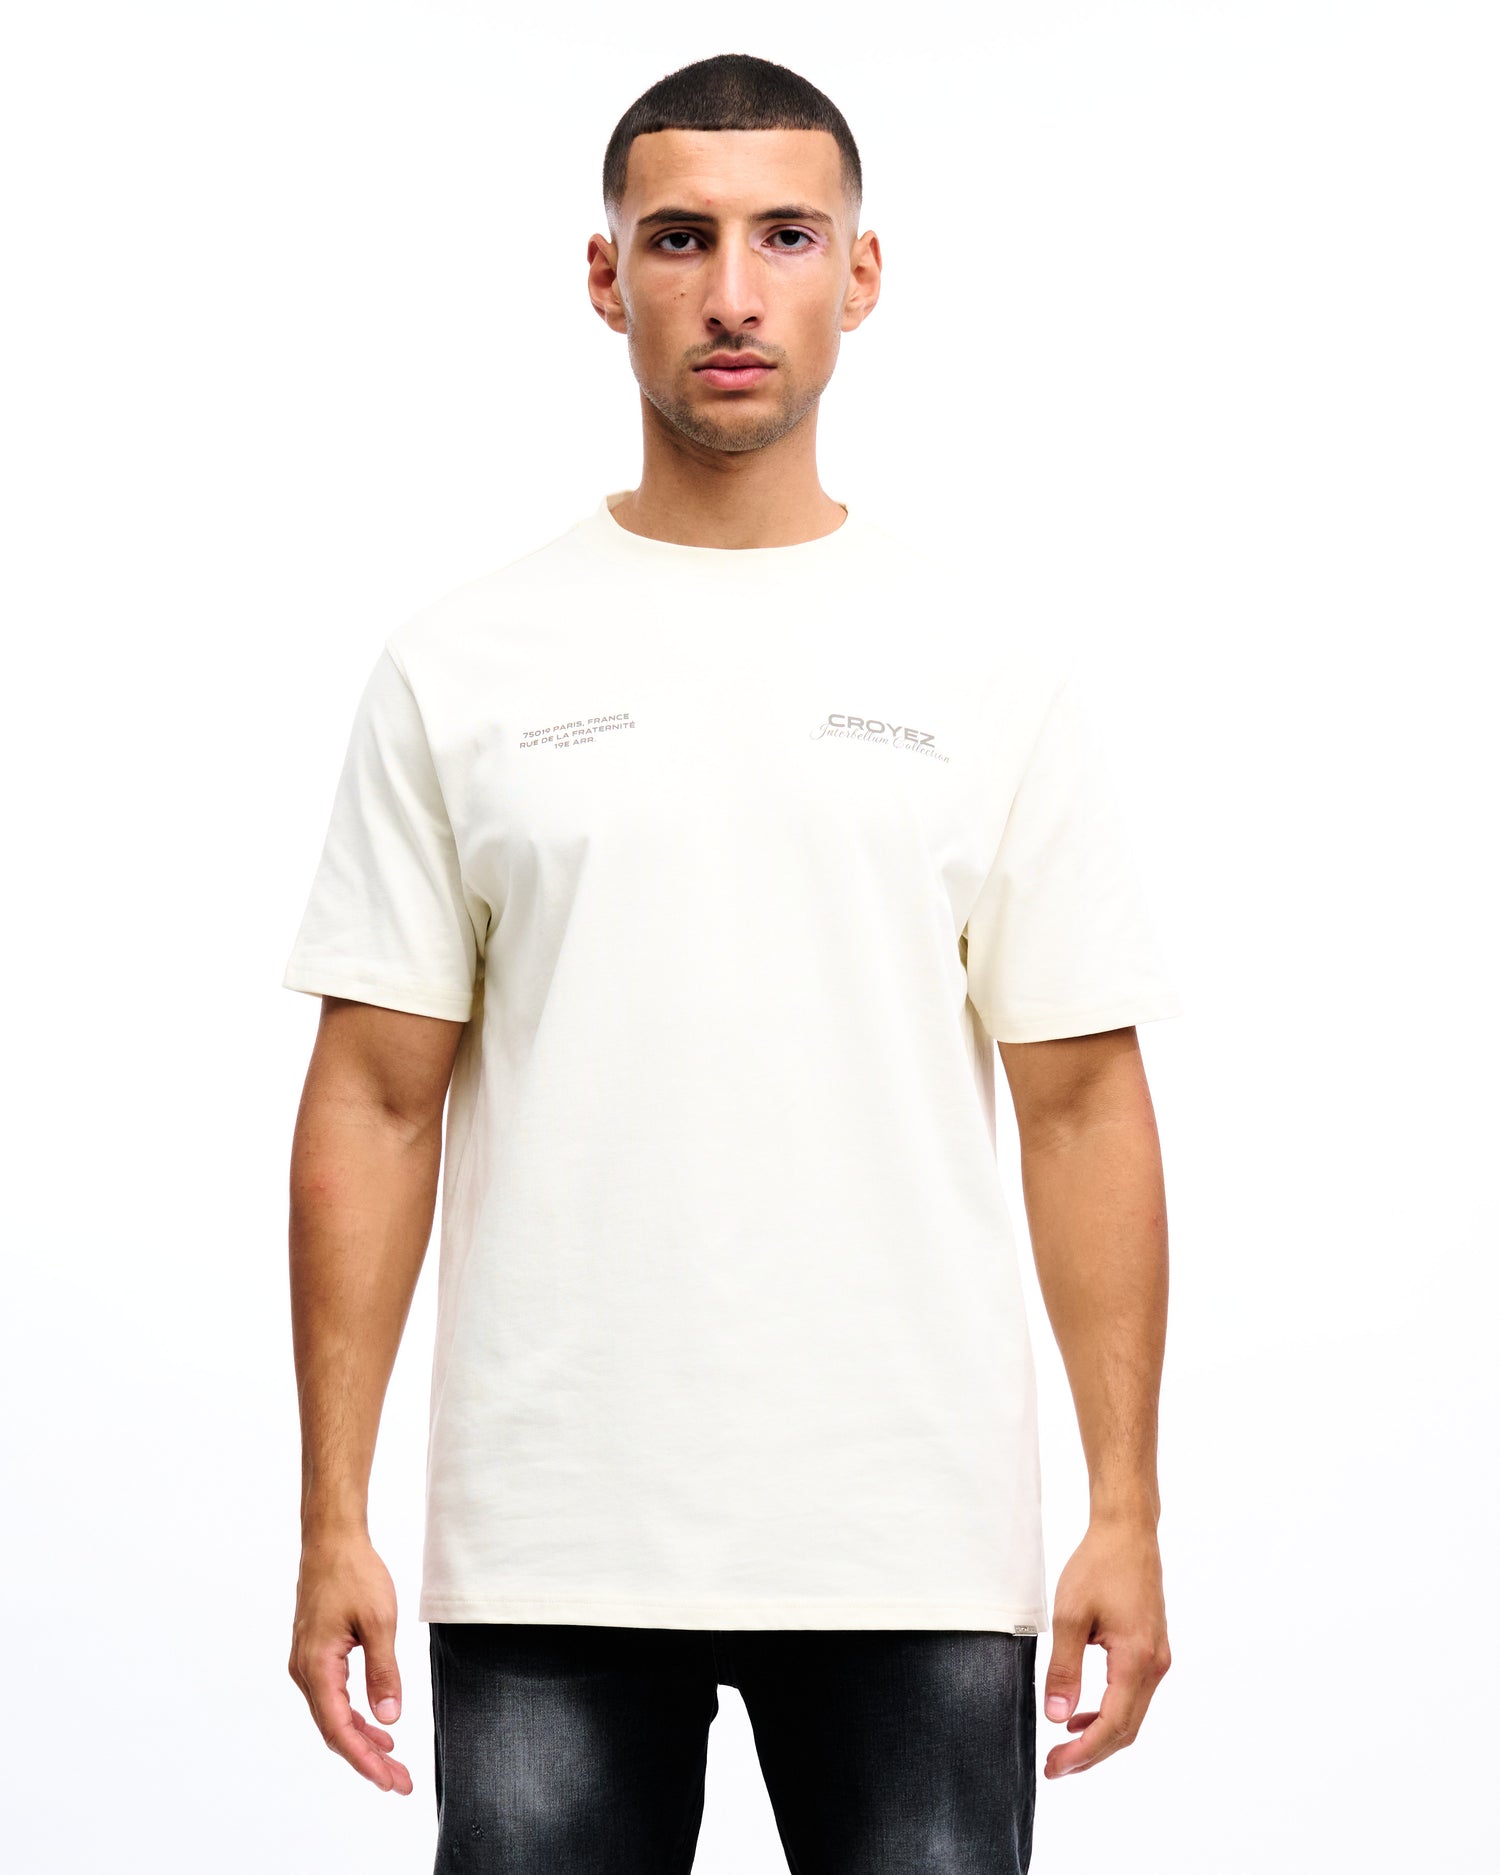 CROYEZ COLLECTION T-SHIRT - VINTAGE WHITE/BROWN